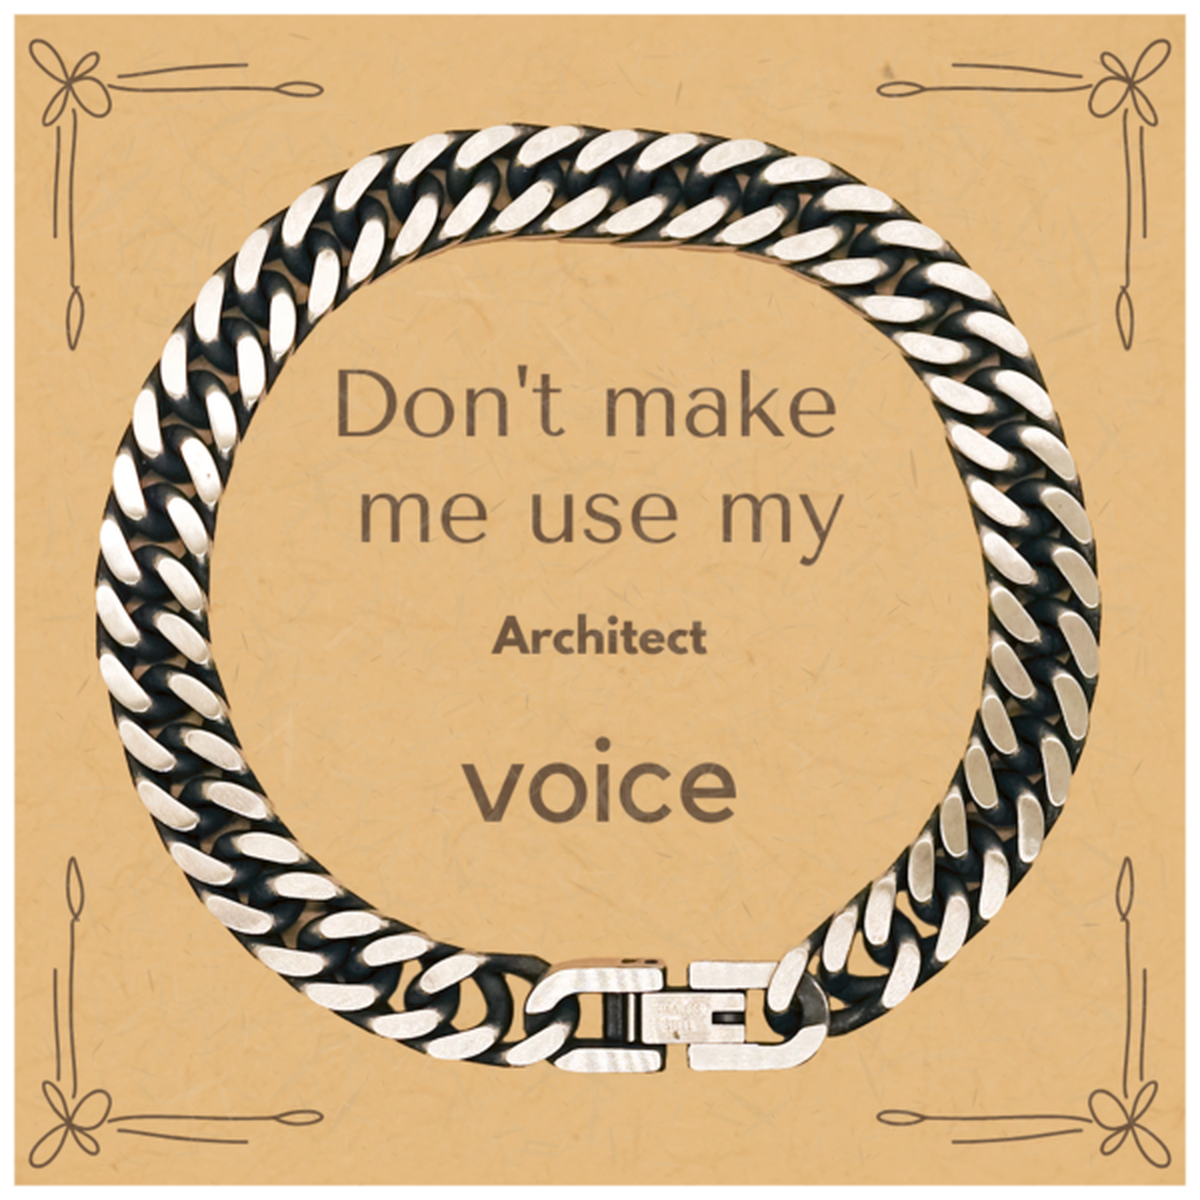 Don't make me use my Architect voice, Sarcasm Architect Card Gifts, Christmas Architect Cuban Link Chain Bracelet Birthday Unique Gifts For Architect Coworkers, Men, Women, Colleague, Friends